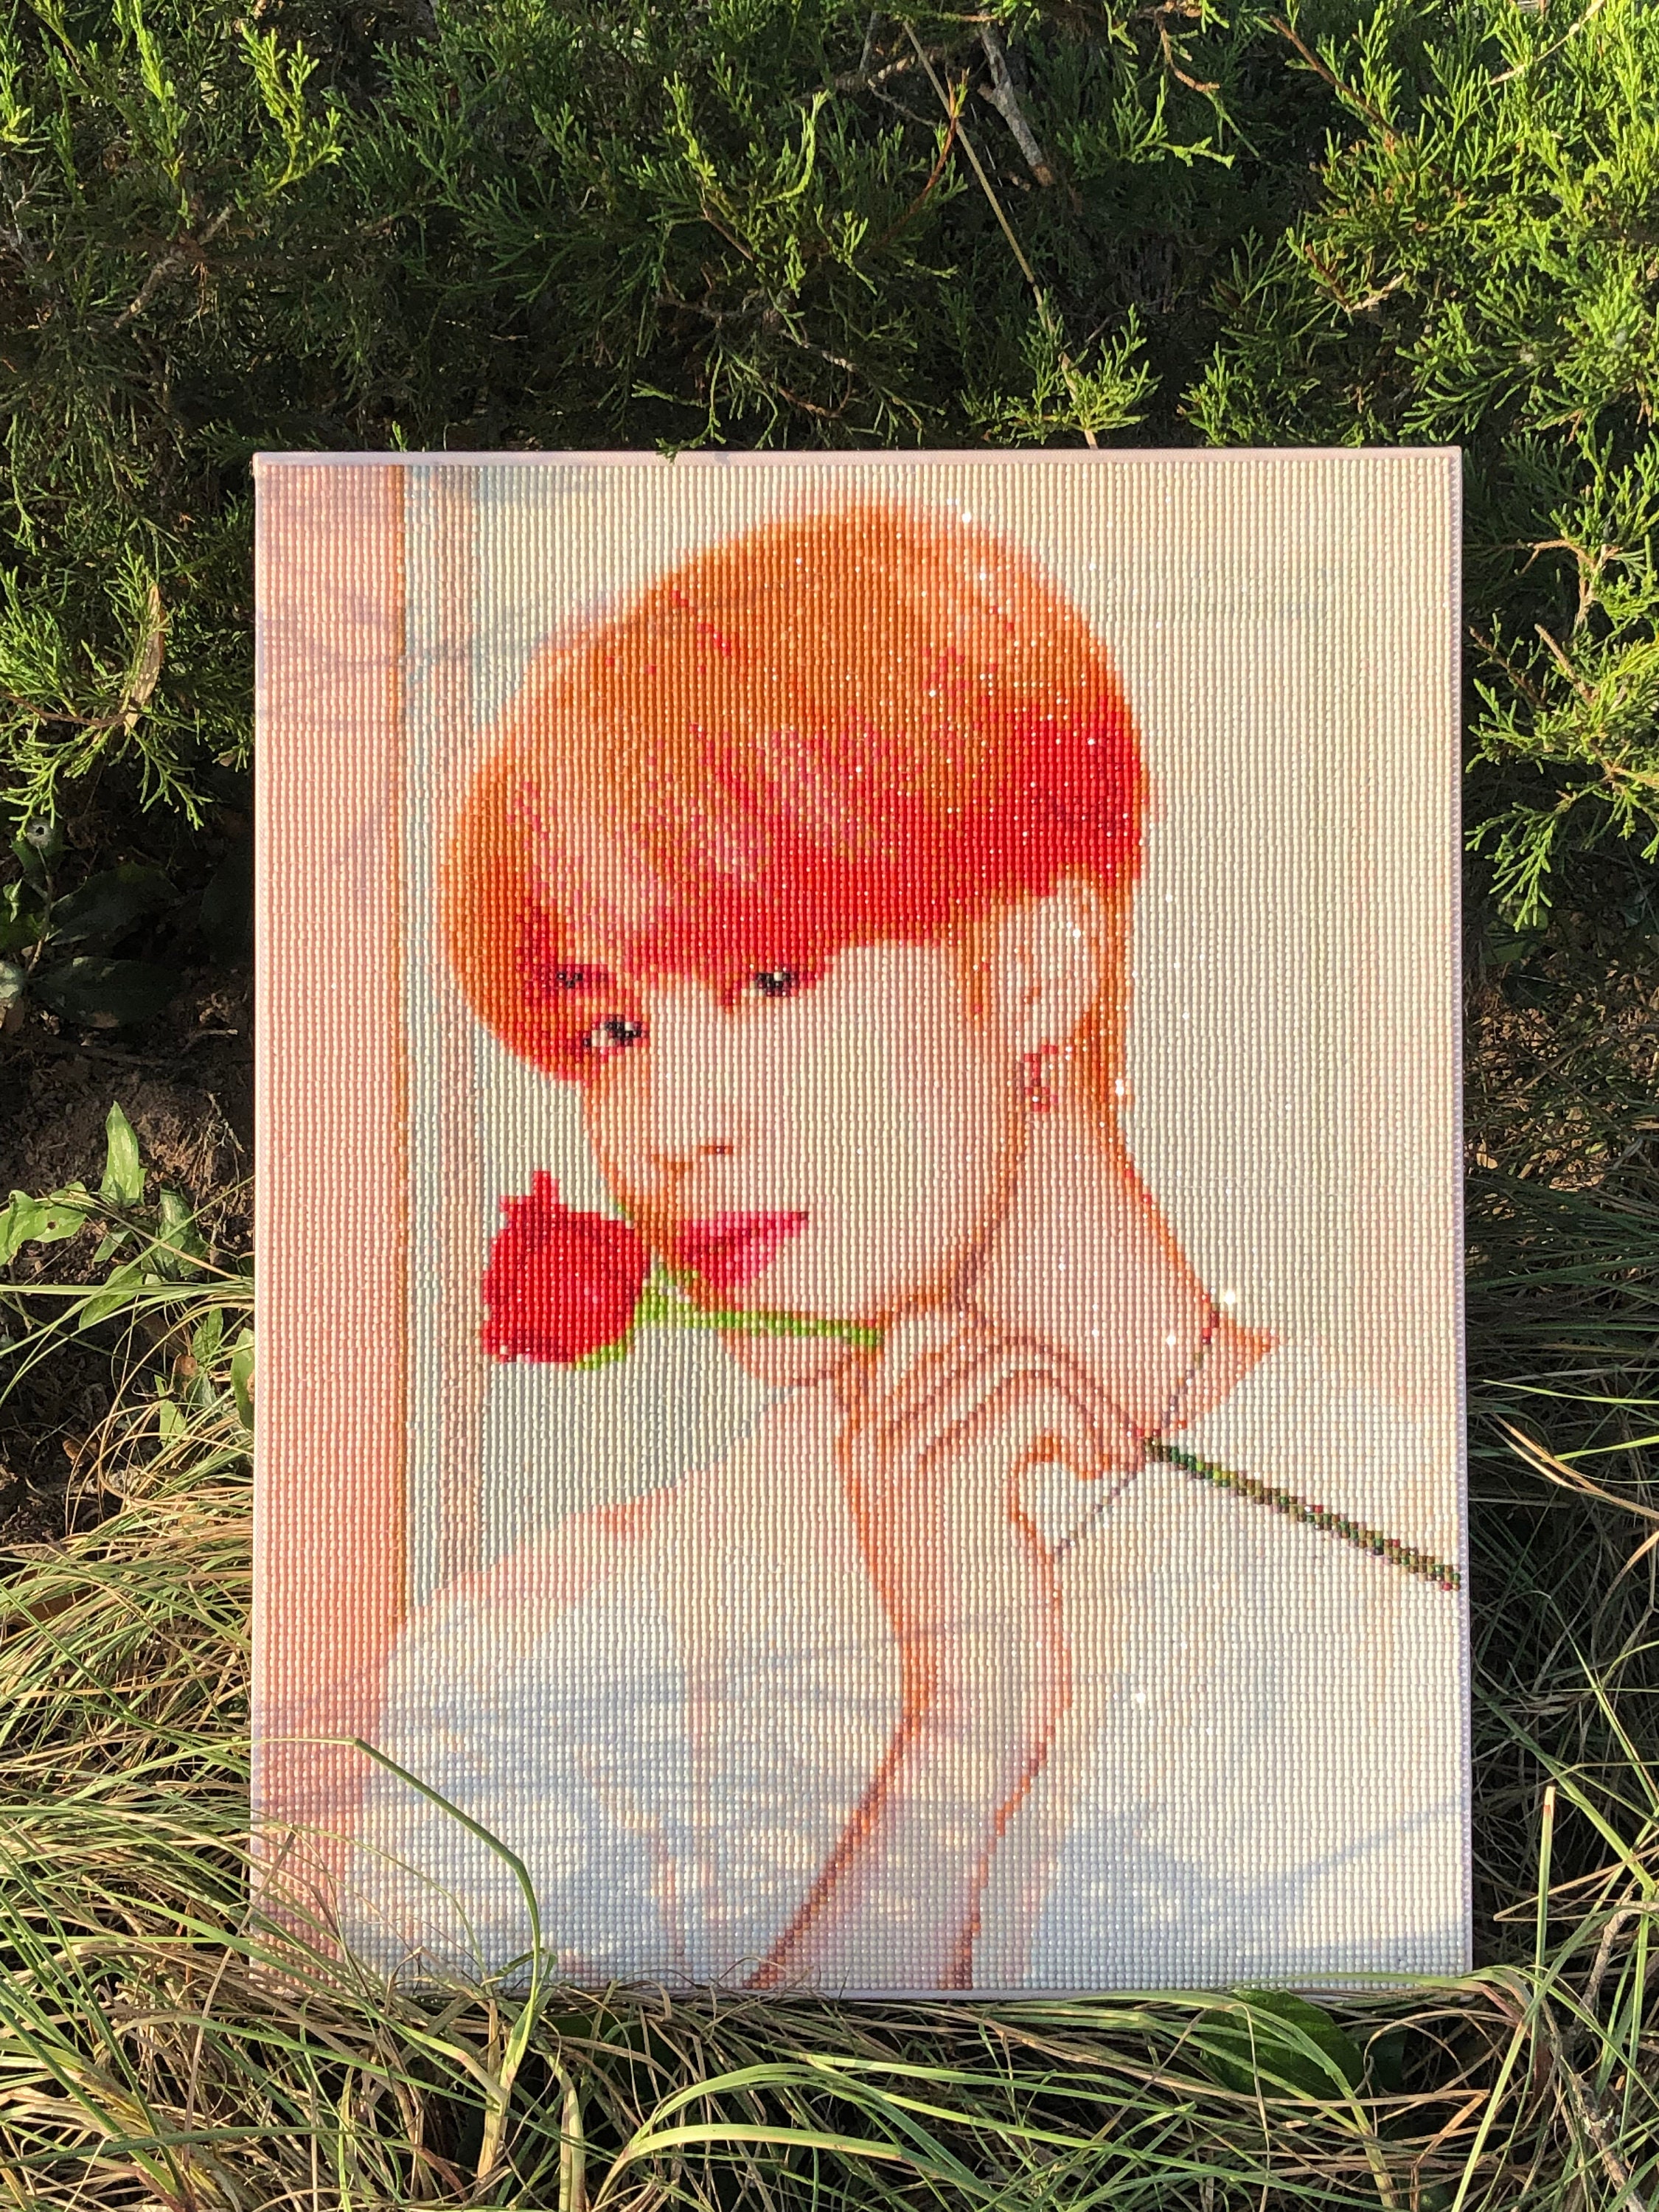 Diamond Painting BTS  Art of Paint by Number